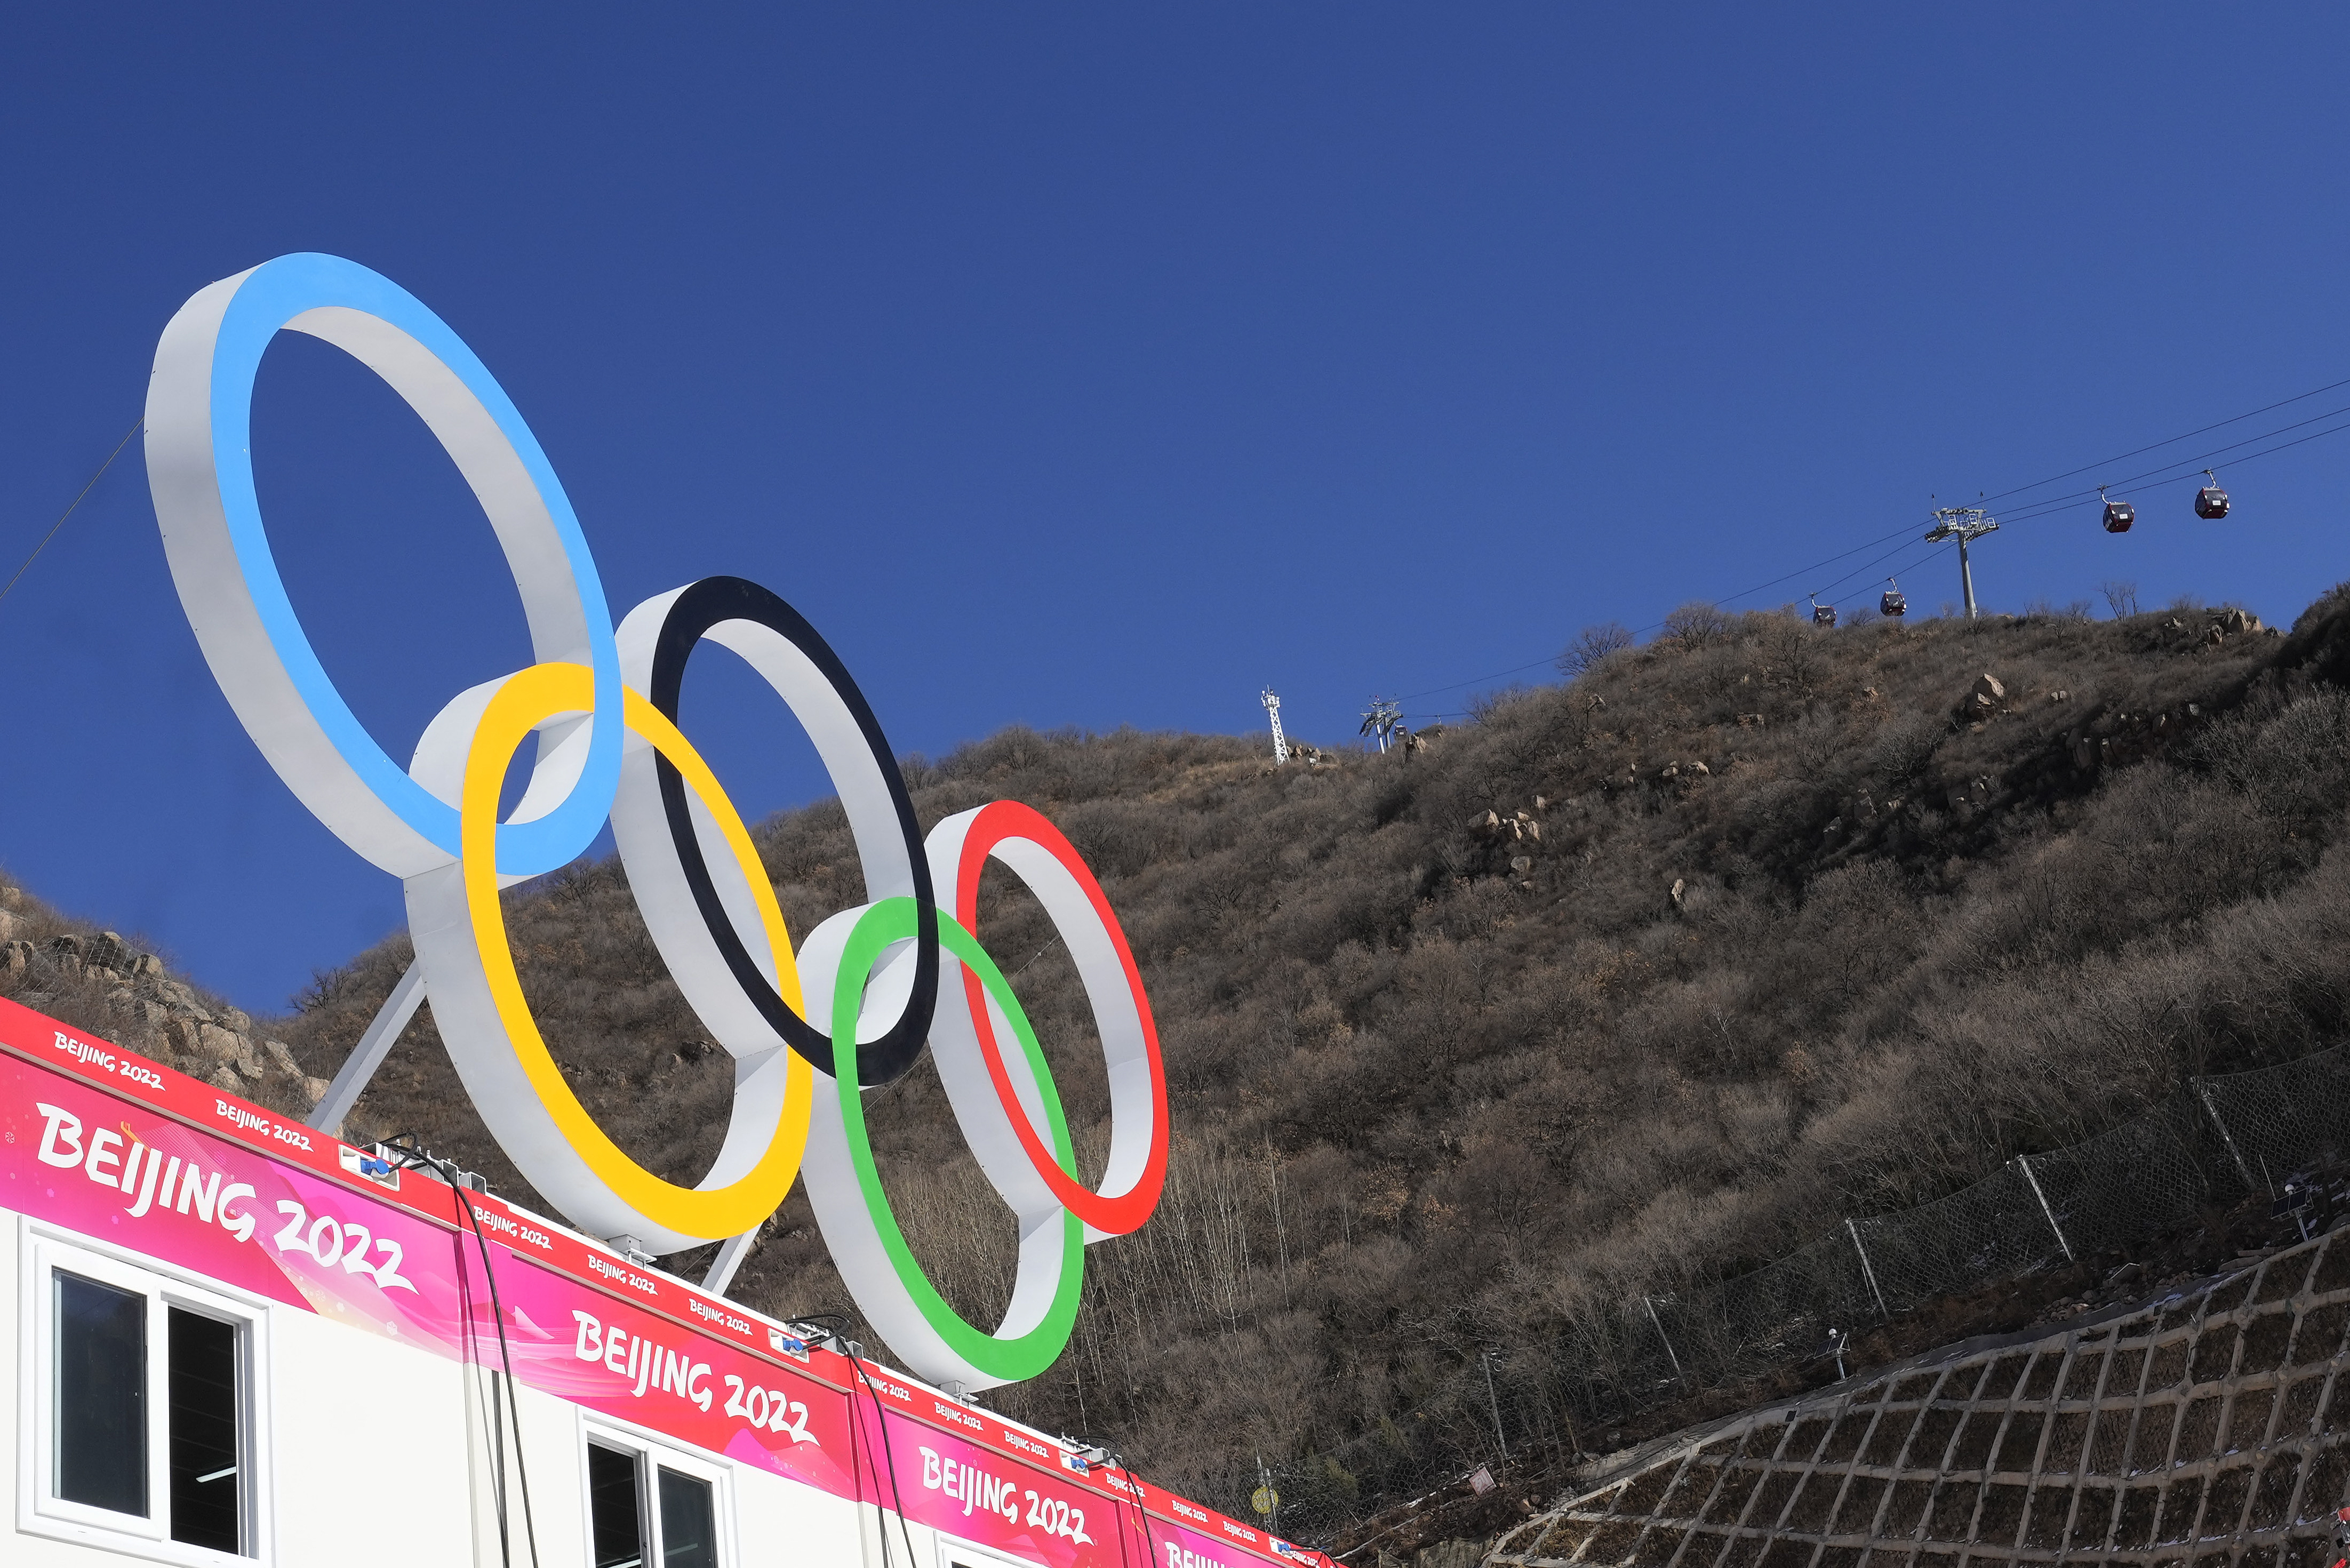 2022 Beijing Winter Olympics How to watch every event, free live stream, TV channels